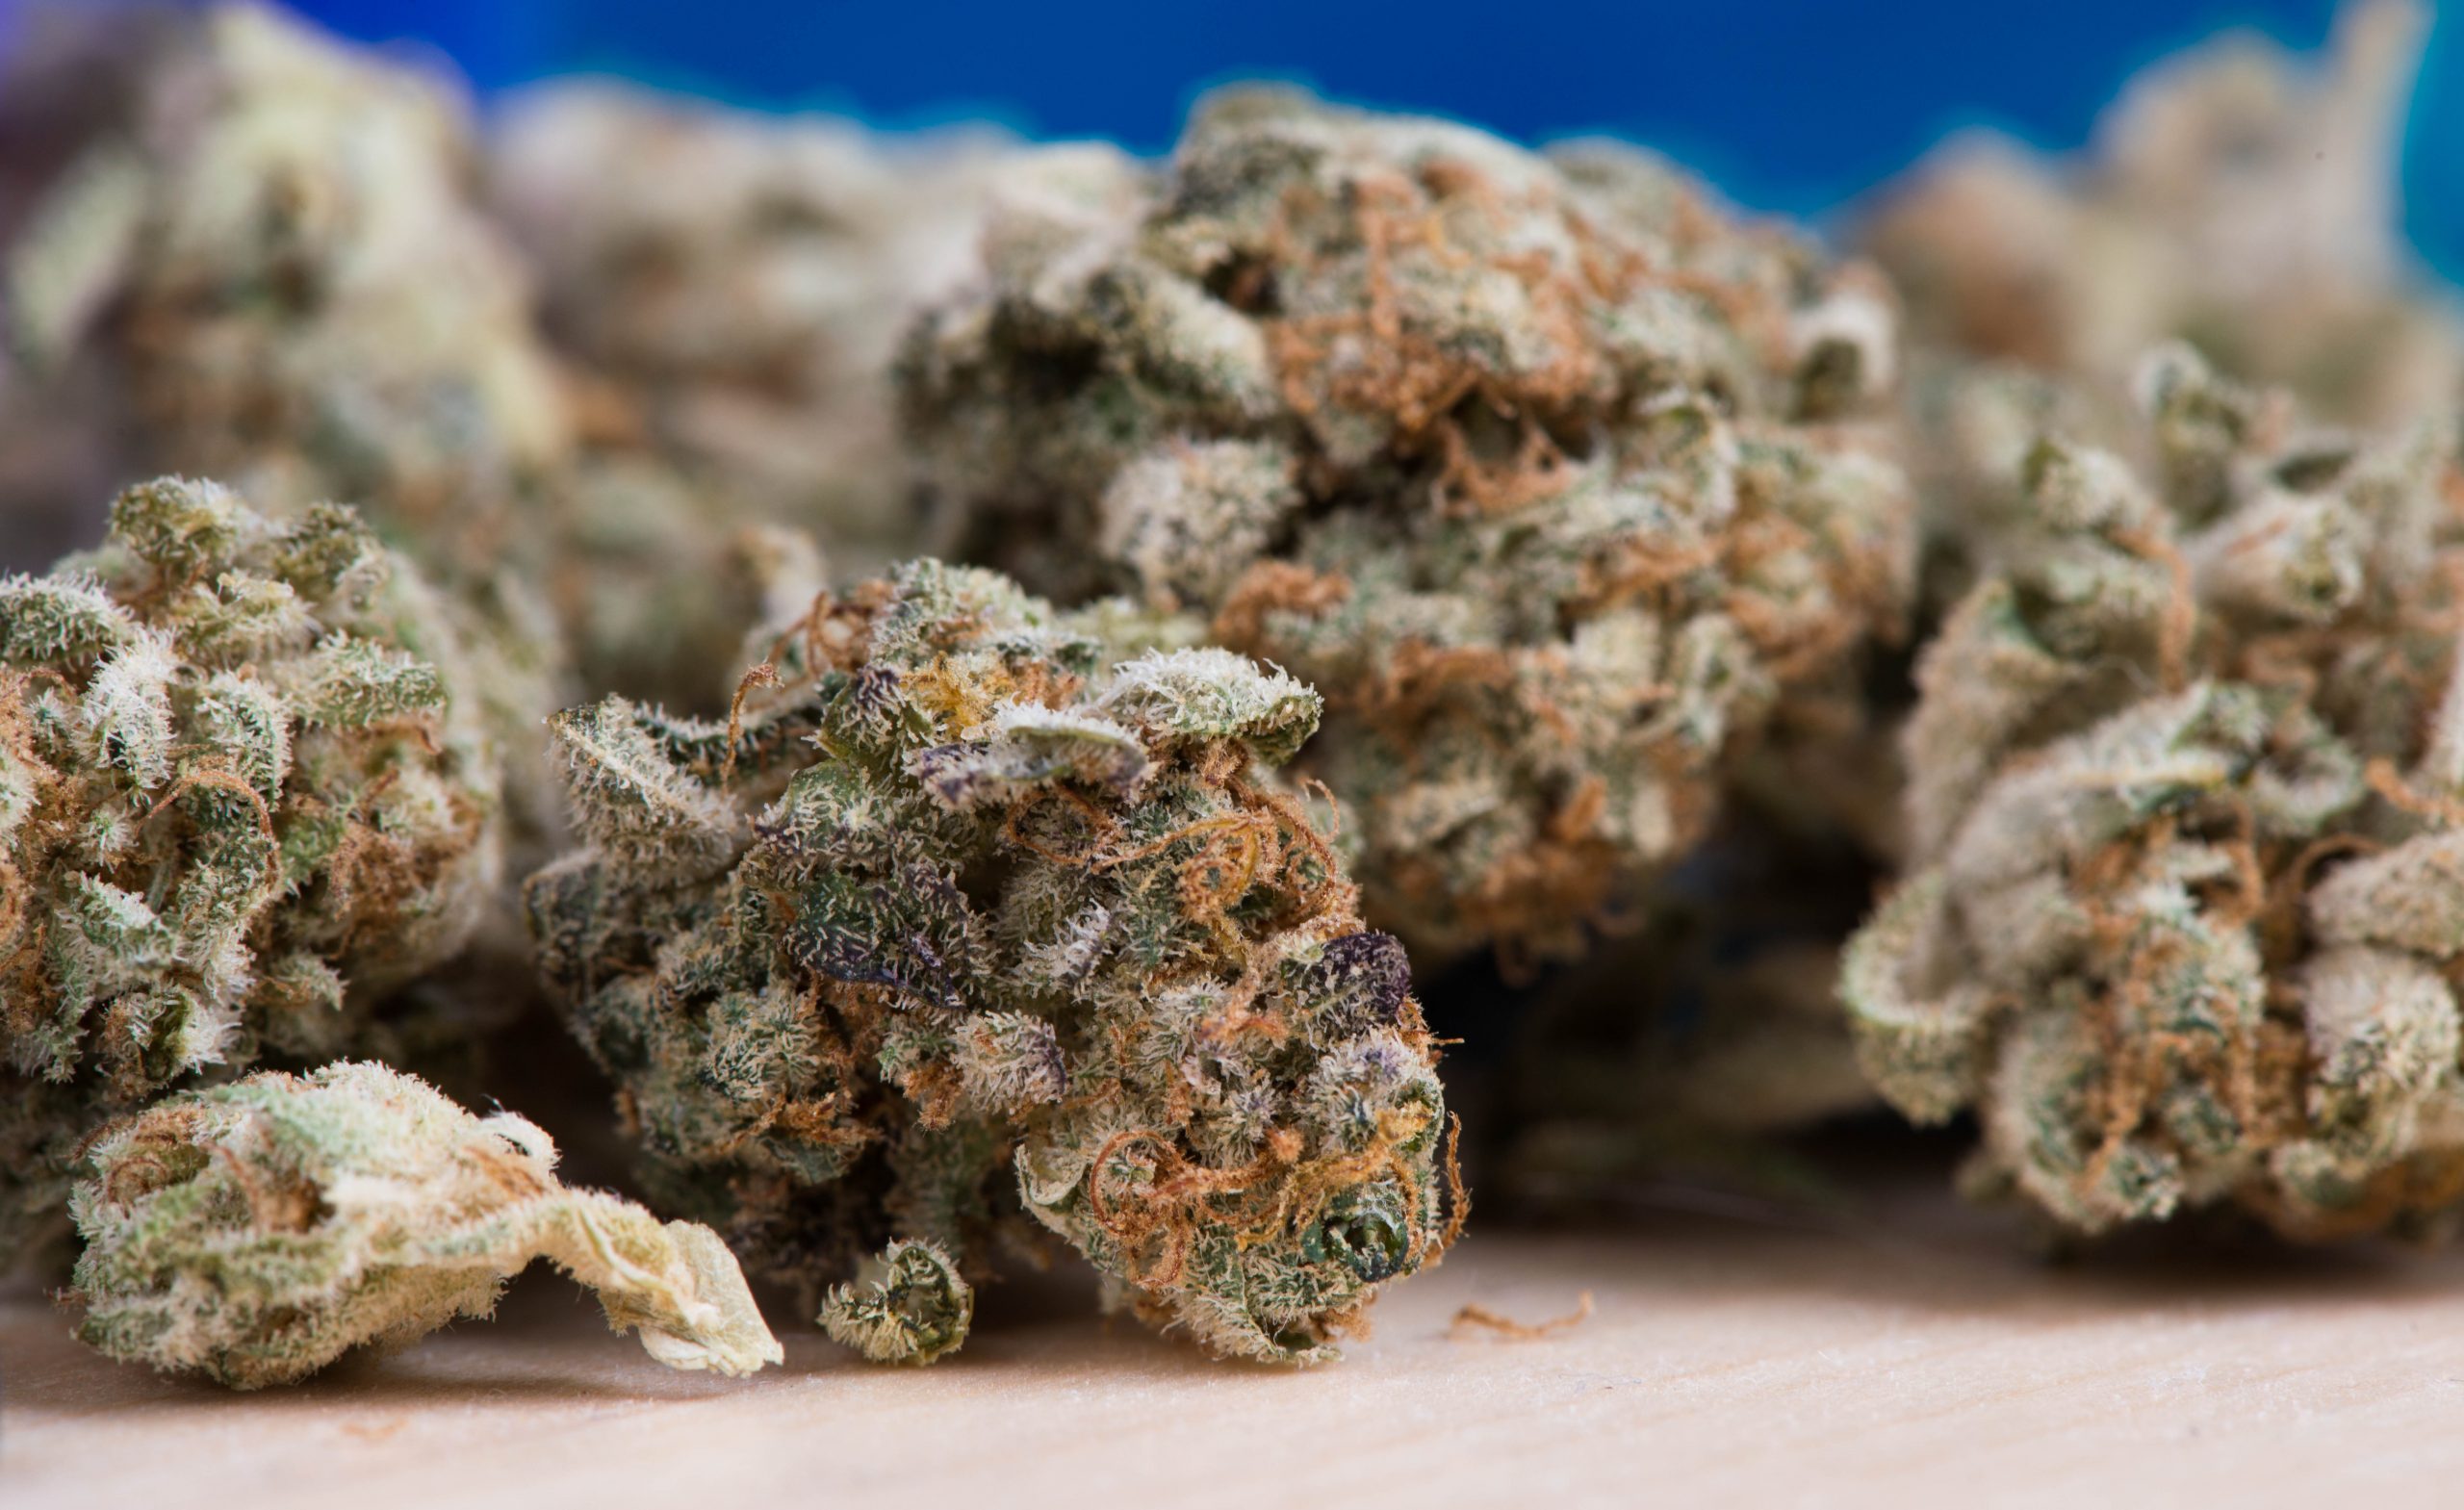 BENEFITS OF BUBBA KUSH STRAIN I THOUGHT YOU SHOULD KNOW